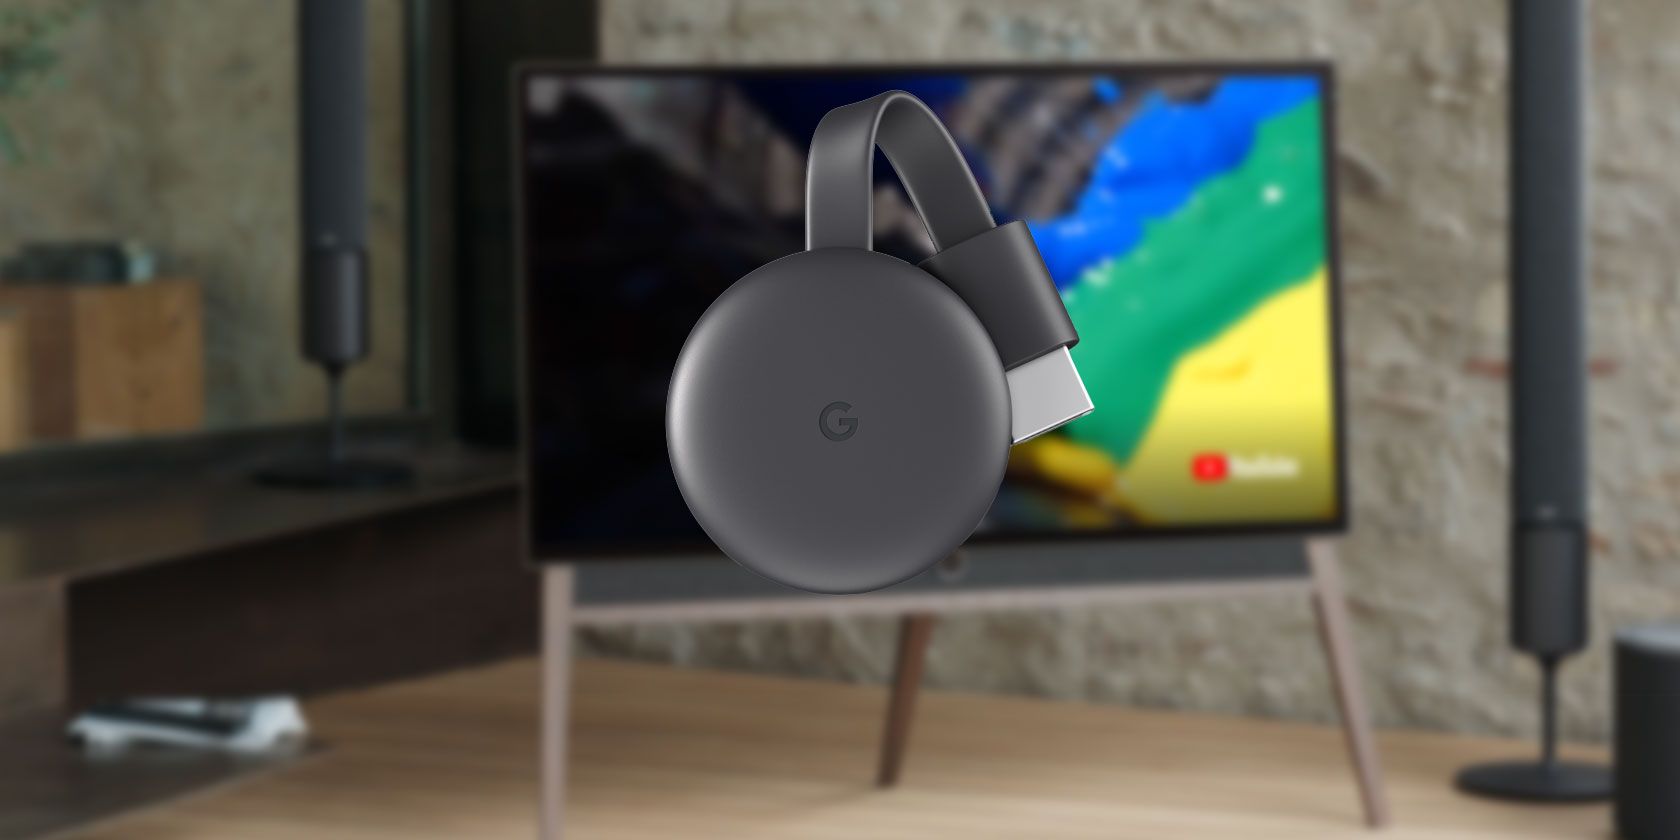 How to Use Chromecast: A Beginner’s Guide